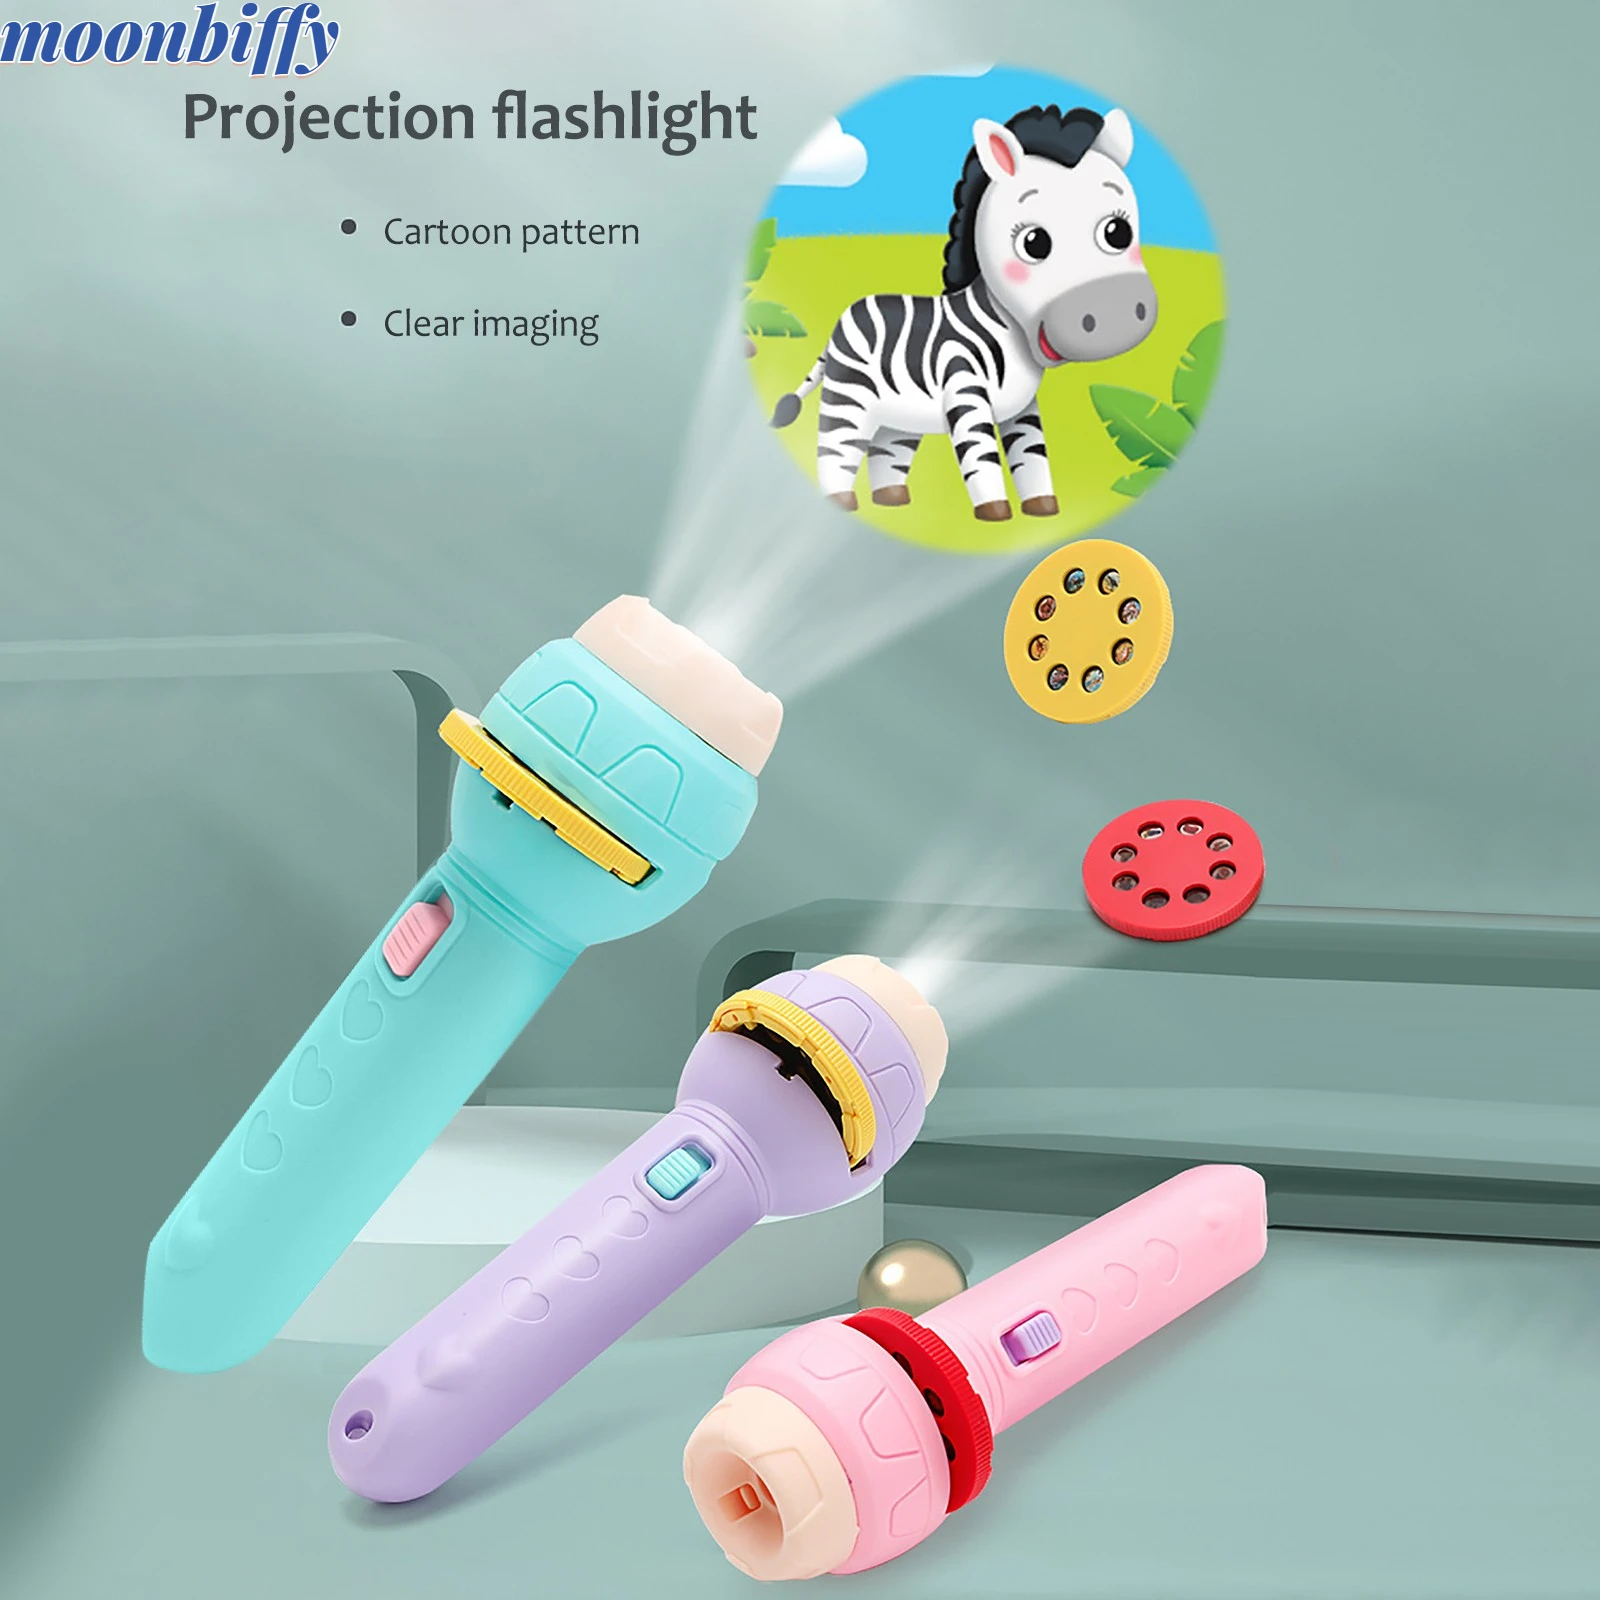 Children's Projection Flashlight Projector 80Kinds of Animal Patters Slide Projector Early Childhood Education Luminous Toy